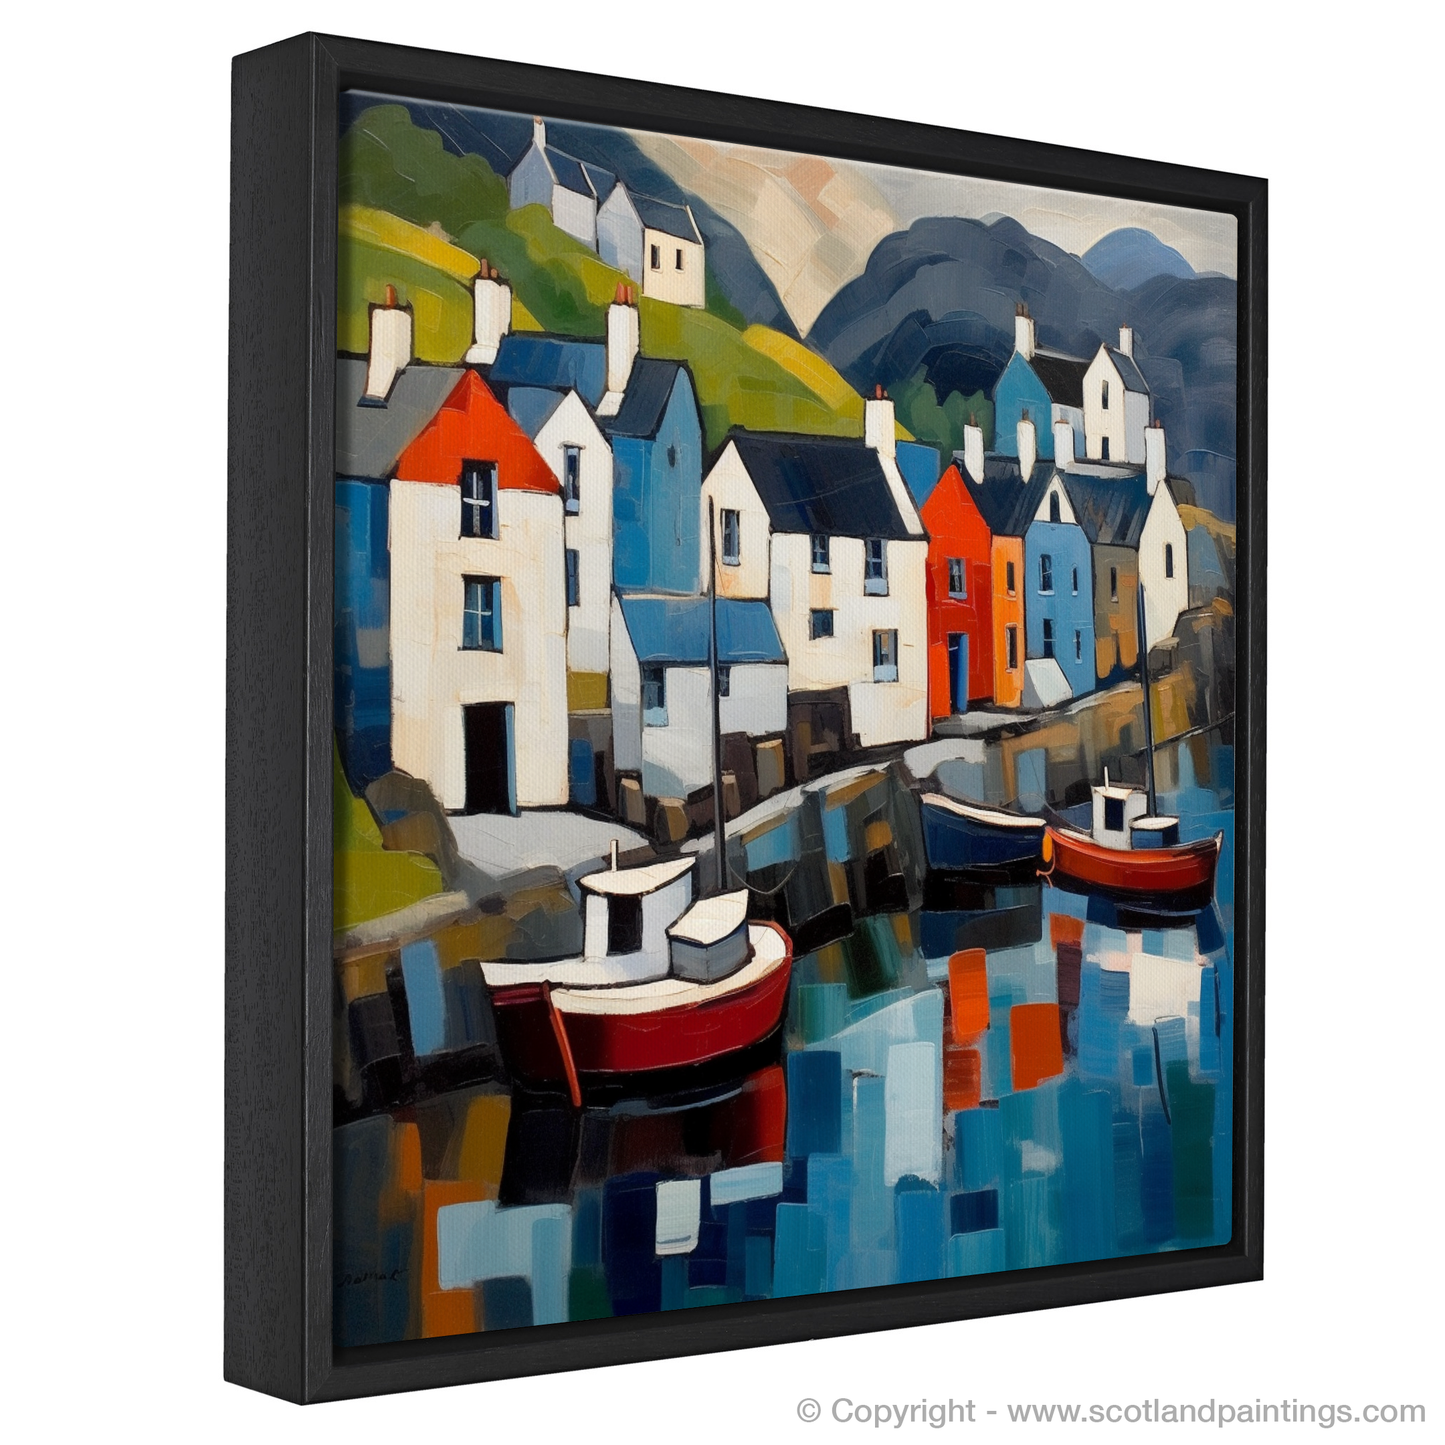 Cubist Portree: A Modernist Take on the Isle of Skye Harbour